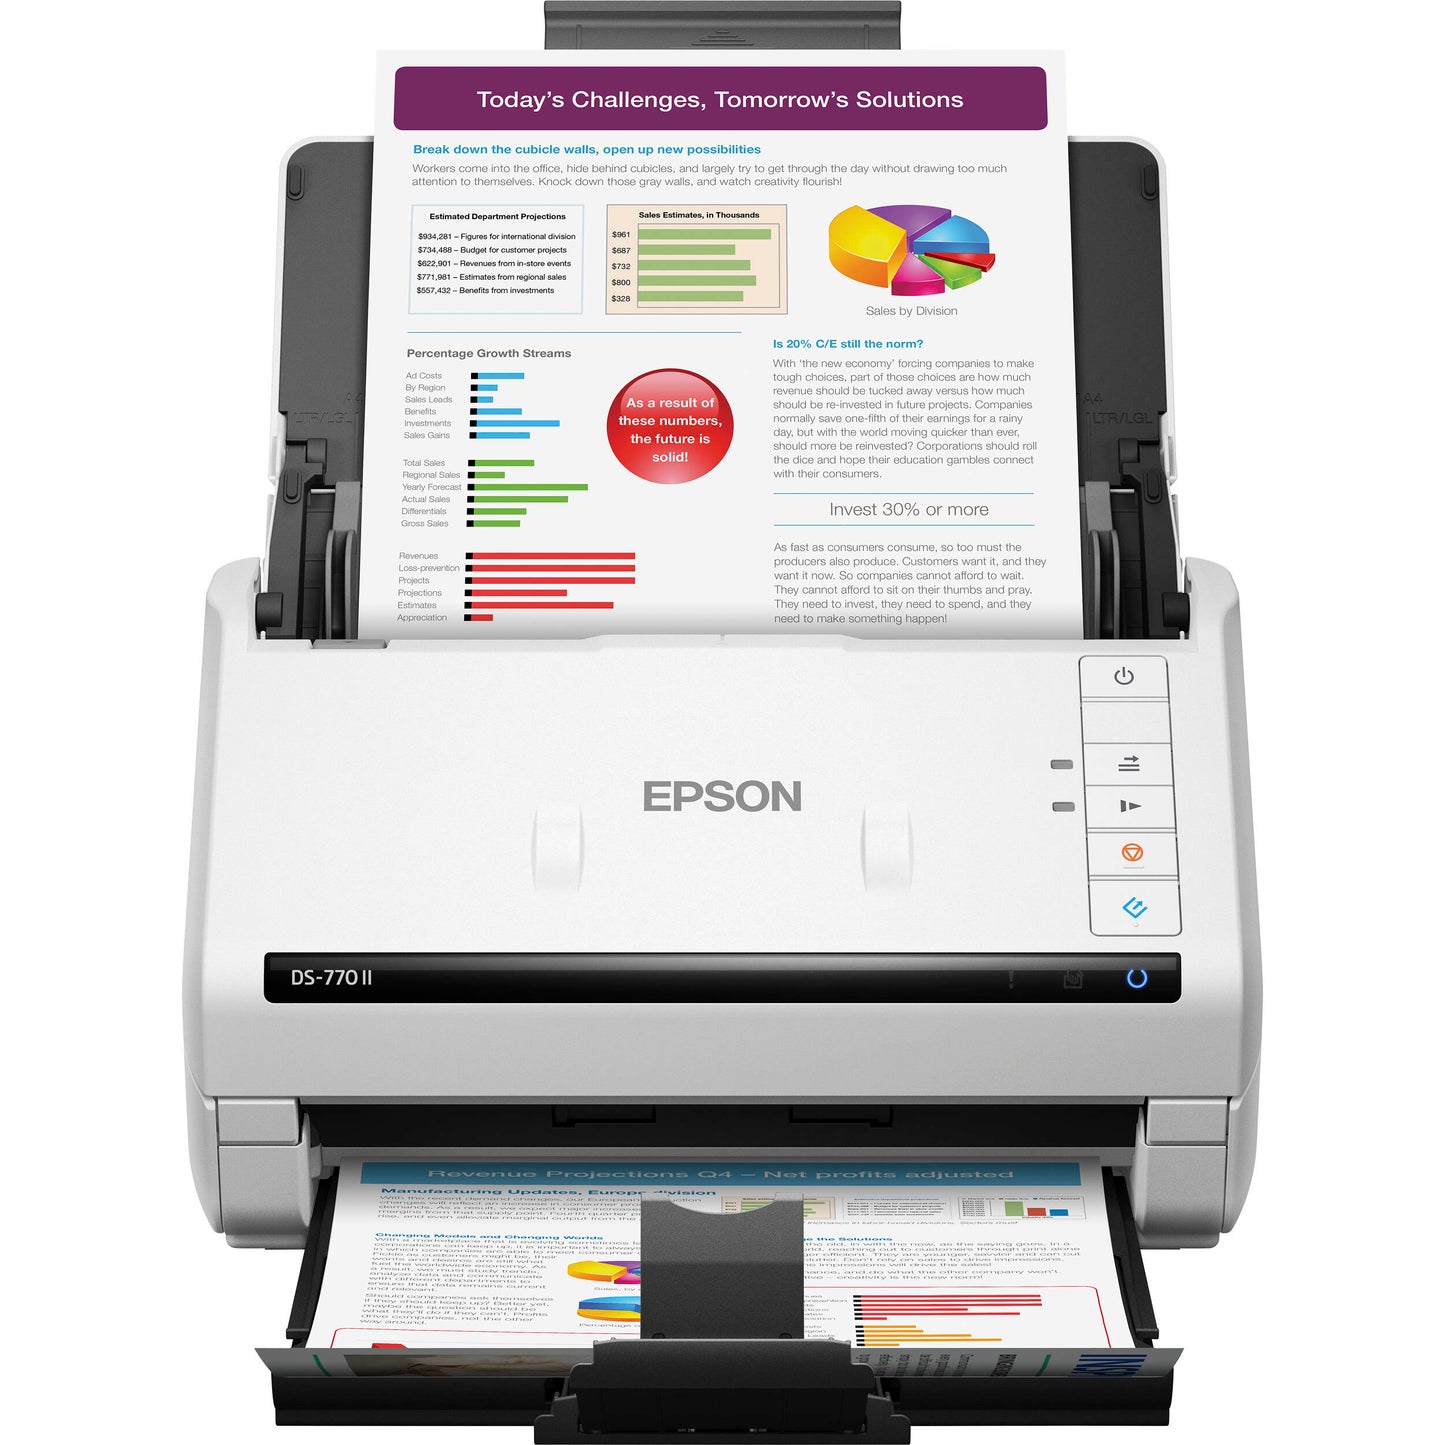 Epson WorkForce DS-770II A4 Color Duplex Sheet-fed High-Speed Document Scanner with ADF, High-Volume Scanning, Auto Size Recognition, Paper Protection, Image Sensor Glass Dirt Detection, and Flatbed Option